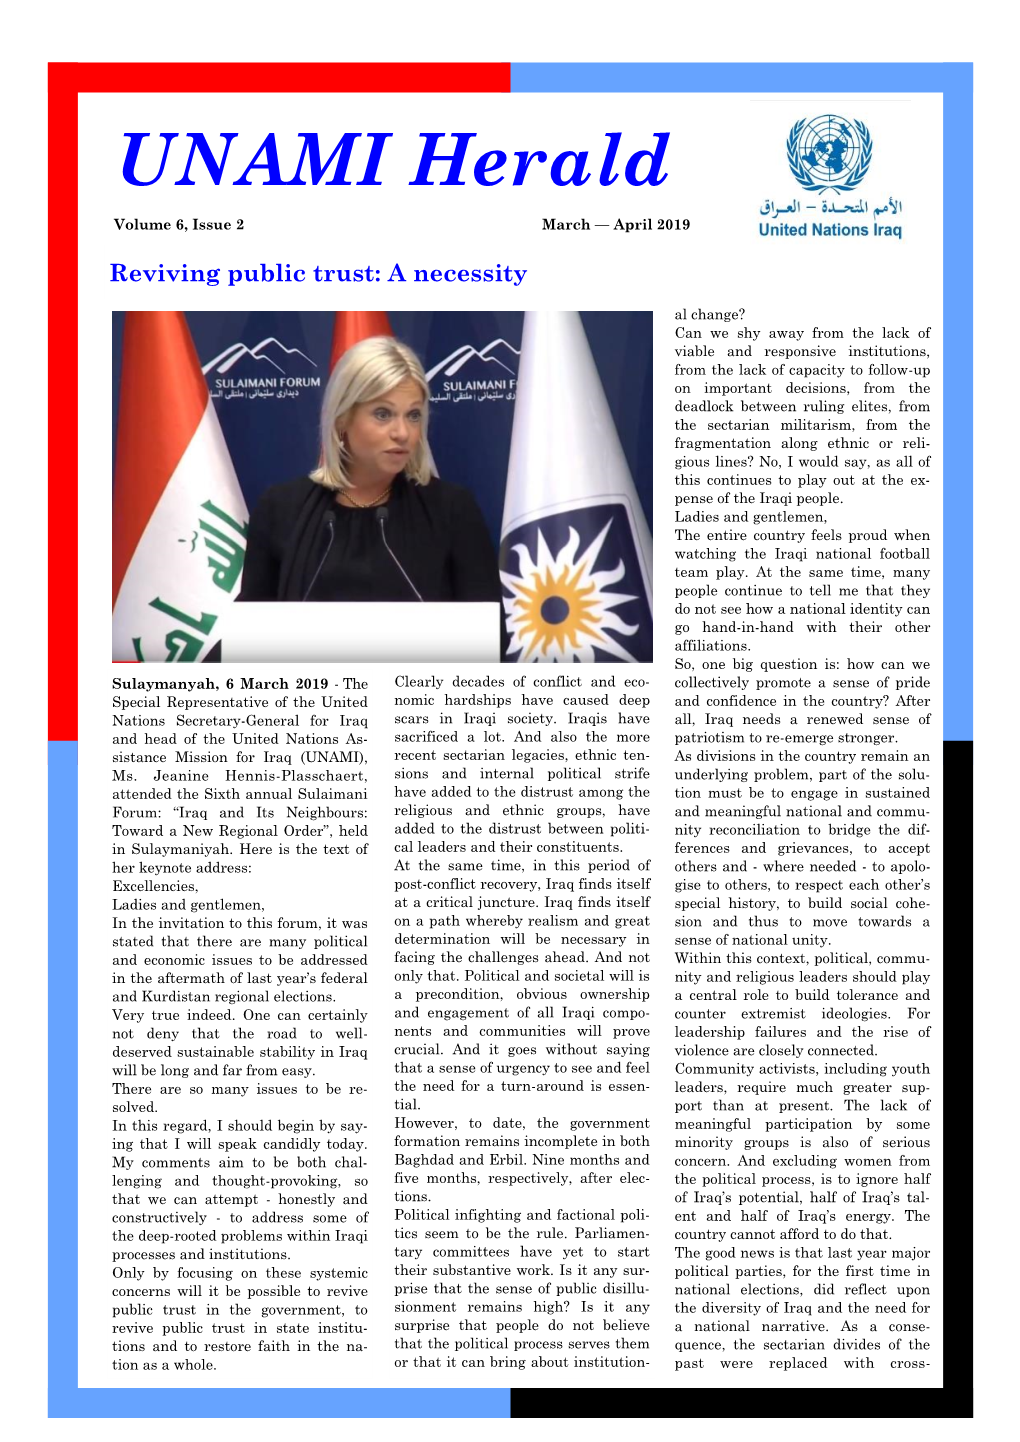 UNAMI Herald Volume 6, Issue 2 March—April 2019 in This Edition